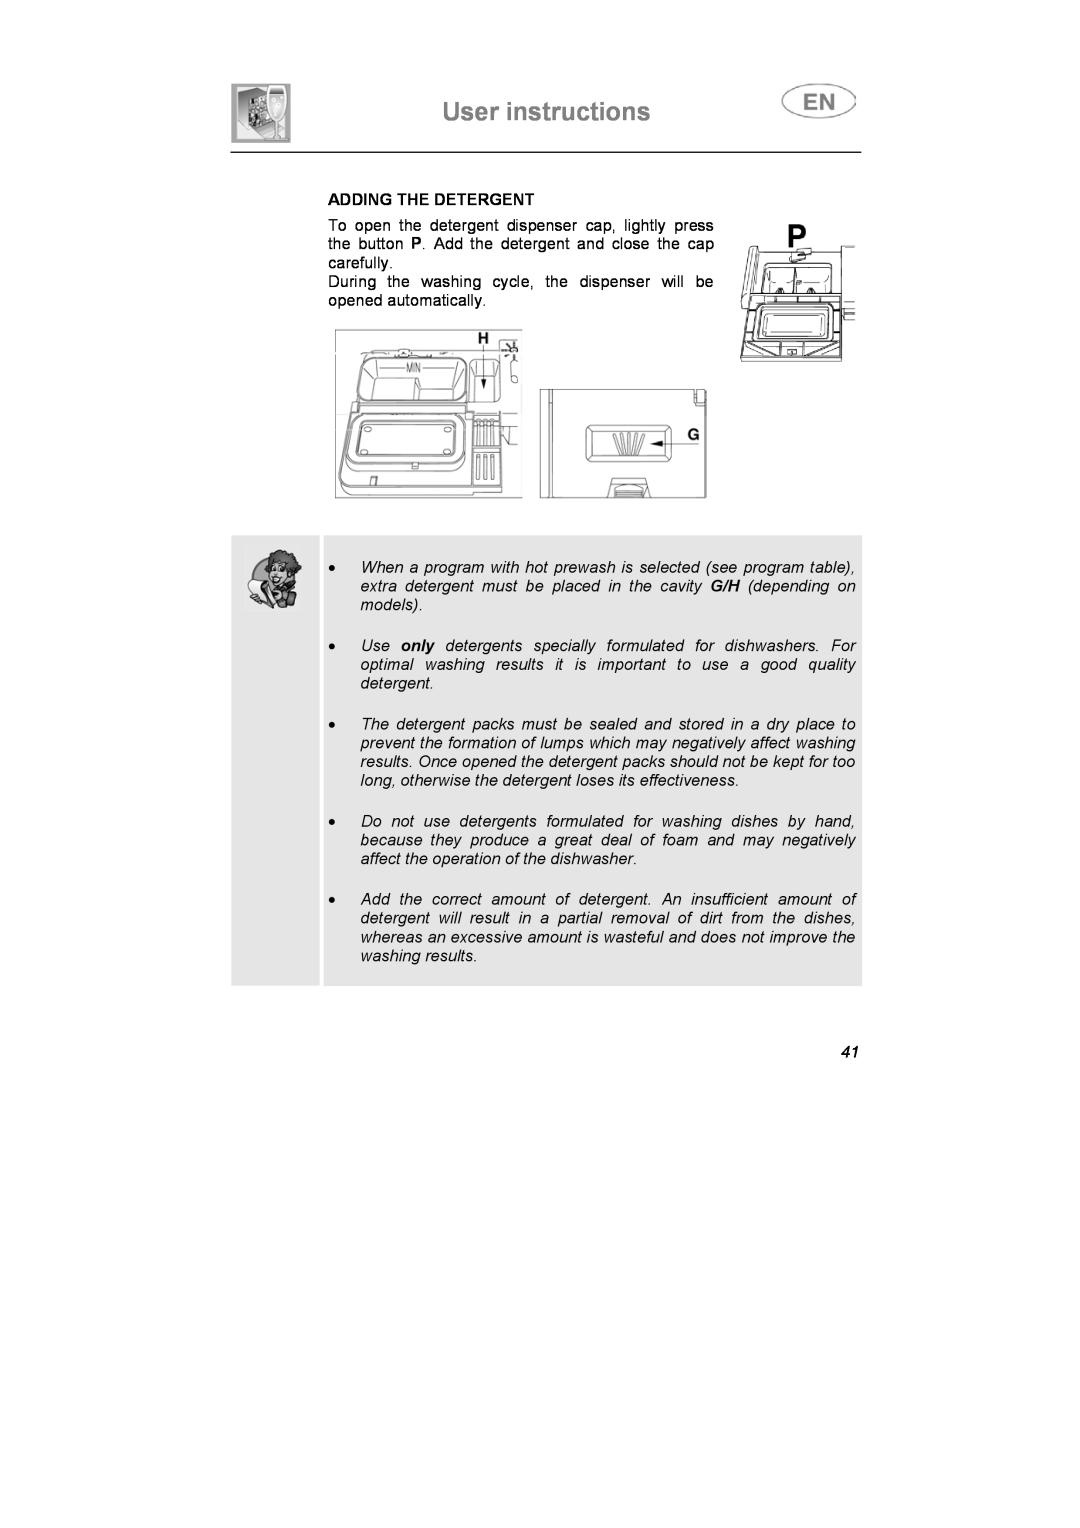 Smeg STA613 User instructions, Adding The Detergent, During the washing cycle, the dispenser will be opened automatically 